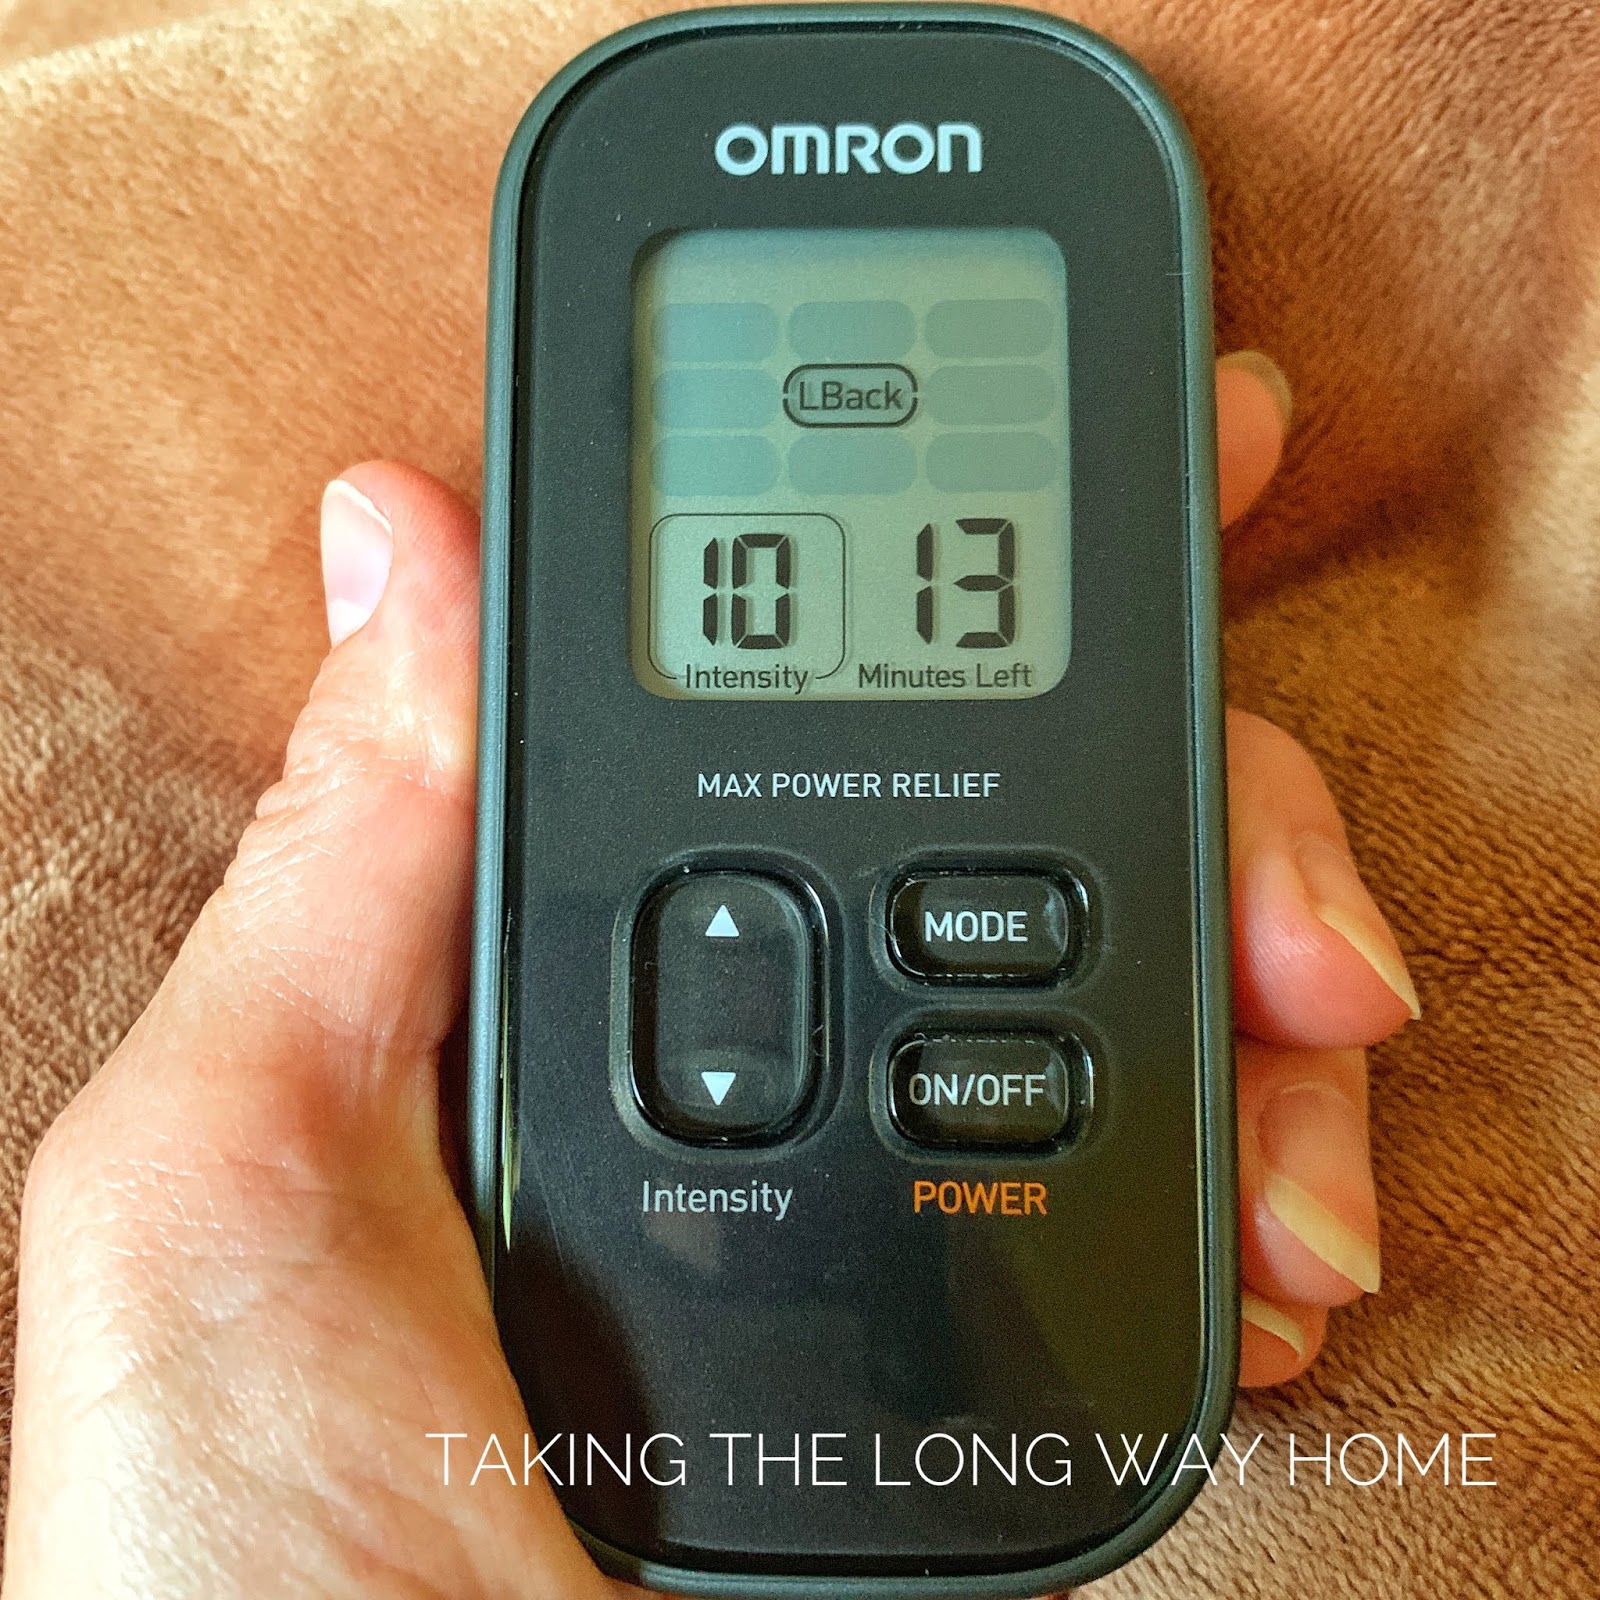 Omron Max Power Relief TENS Therapy Pain Relief